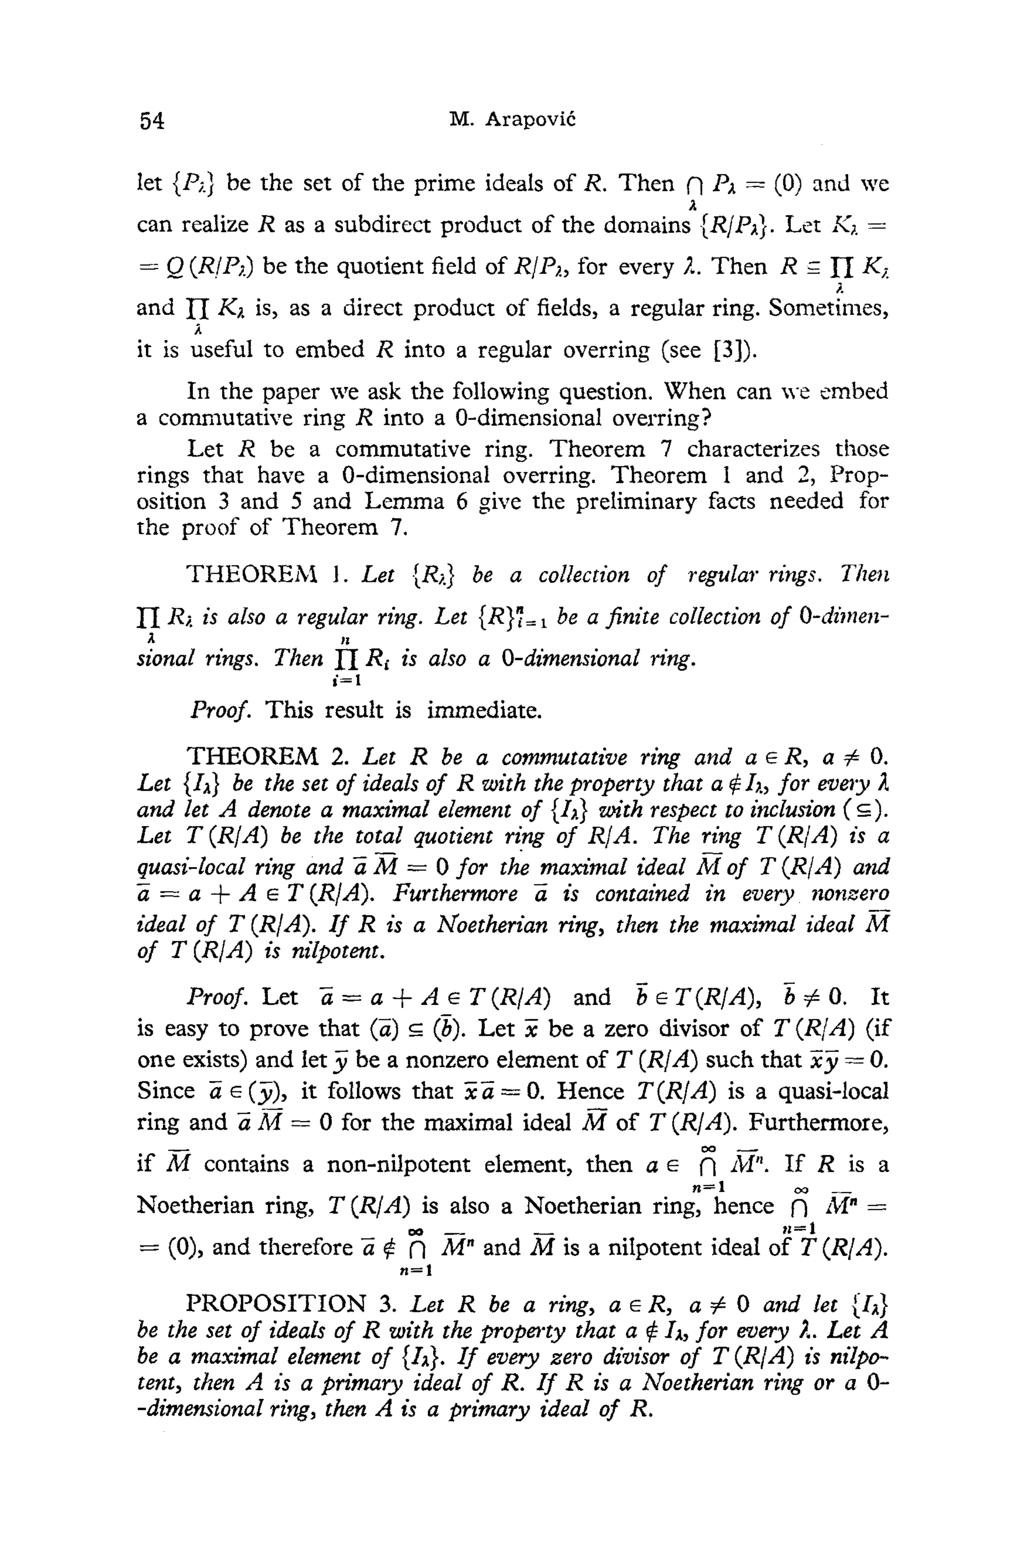 54 M. Arapovic let {Pi.} be the set of the prime ideals of R. Then n P = (O) and \vc can realize R as a subdirect product of the domains {Rf P}. Let K,. = = Q (R!Pi.) be the quotient field of Rf P).